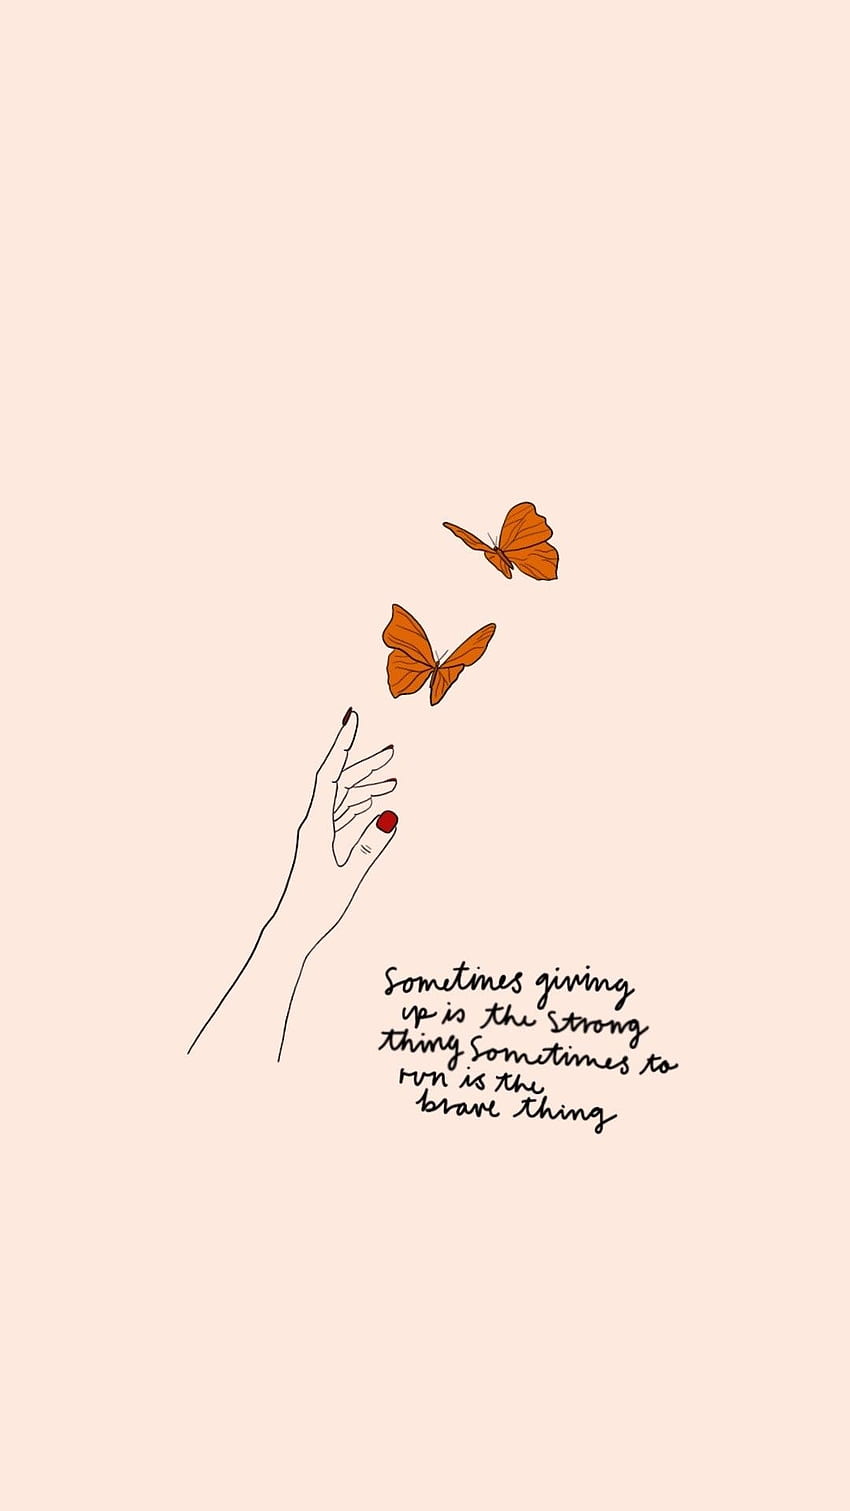 Sometimes giving up is the strongest thing to do. Sometimes to run away is the bravest thing to do. - Taylor Swift